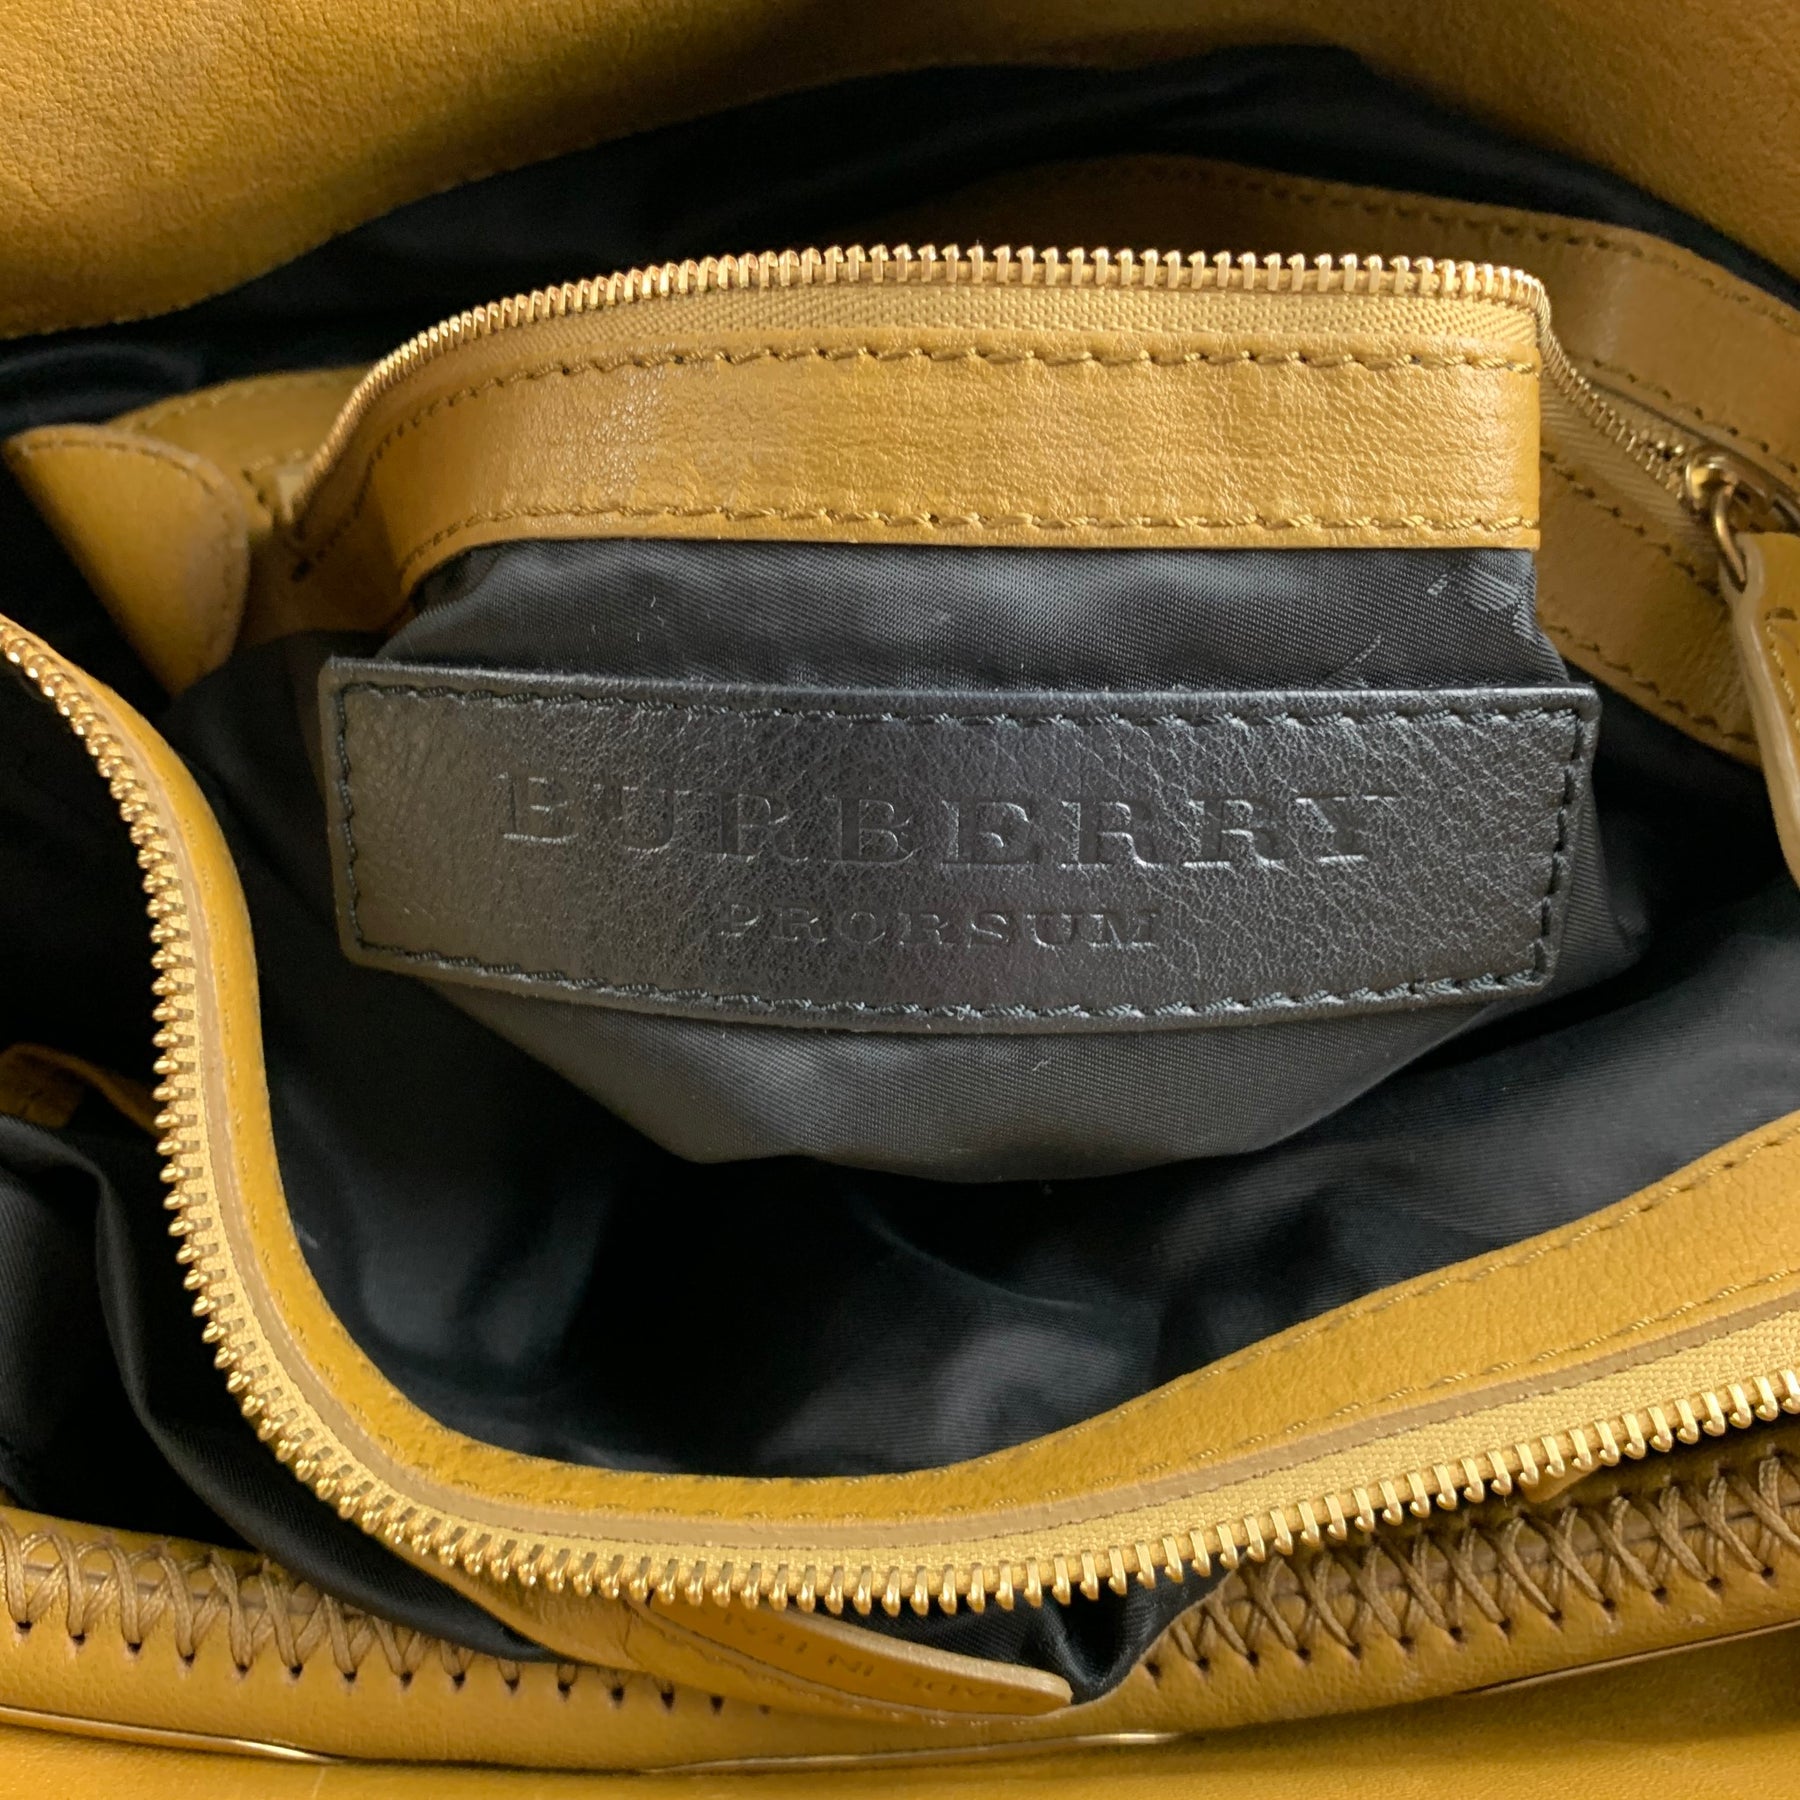 BURBERRY PRORSUM YELLOW PEBBLED LEATHER TOTE BAG NEW